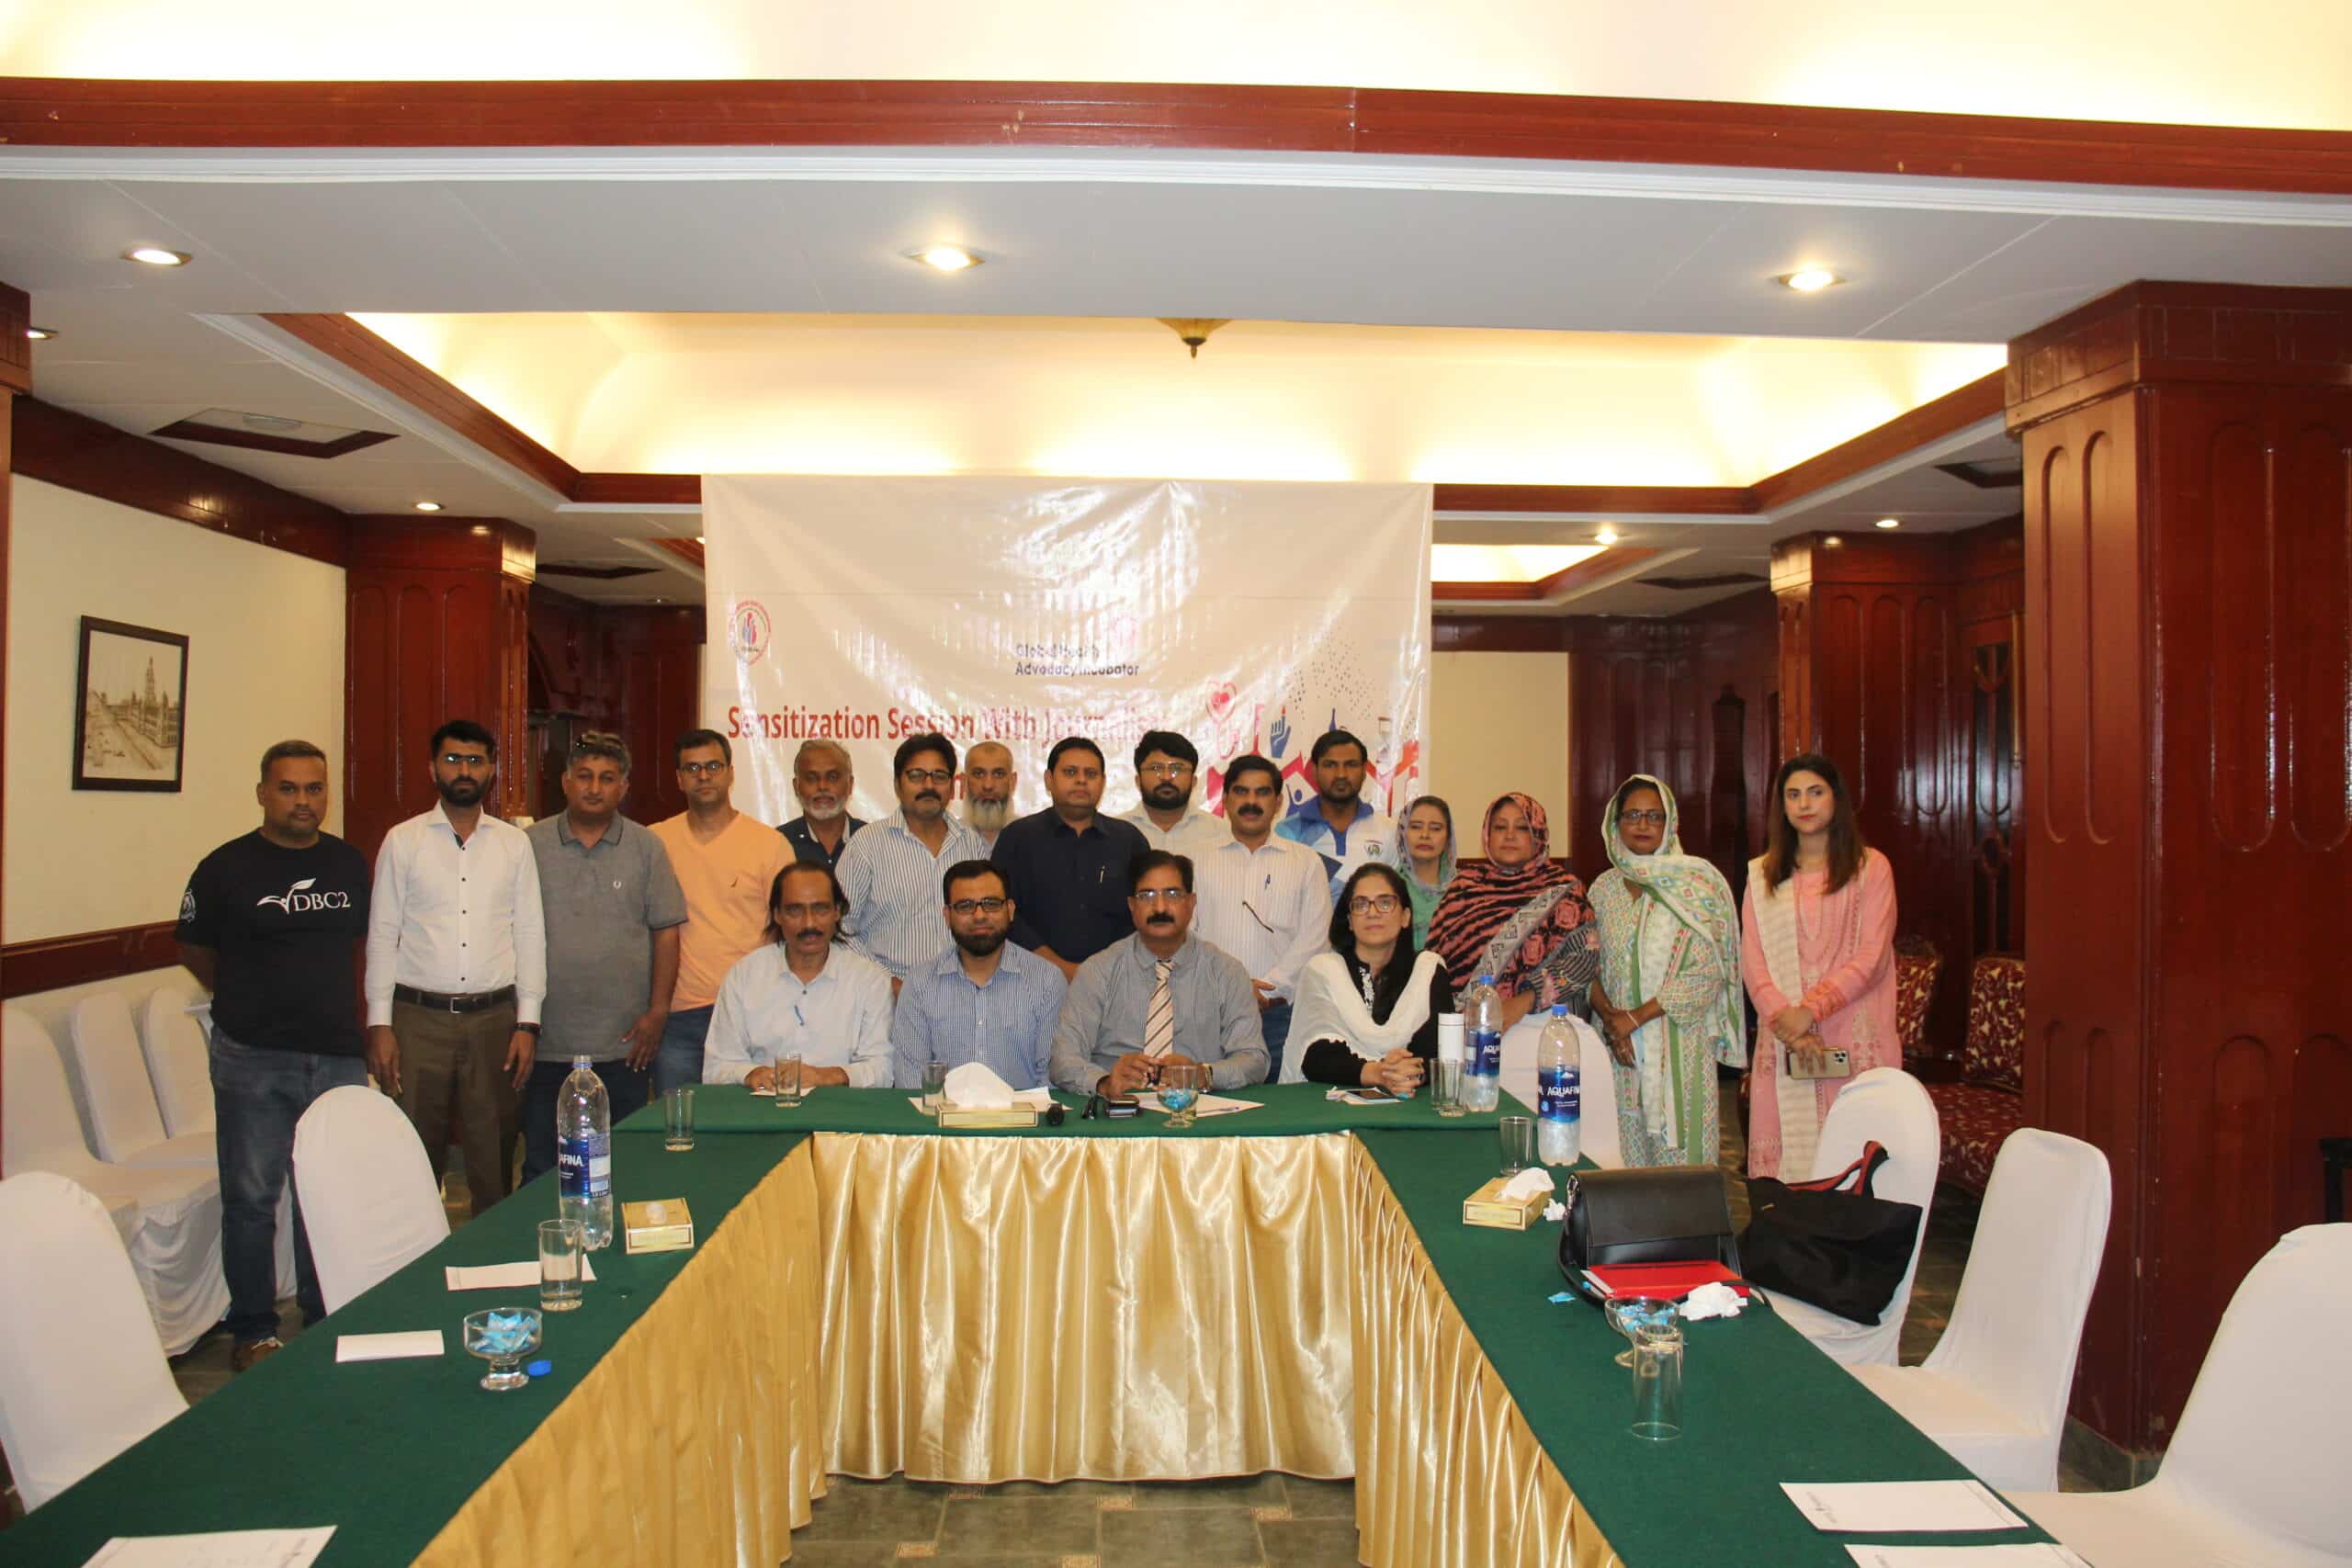 Pakistan National Heart Association  Organized An  Sensitization Session with” Journalists on Harmful Effects of Ultra Processed Food ”    24th August  at  Mehran Hotel Karachi.